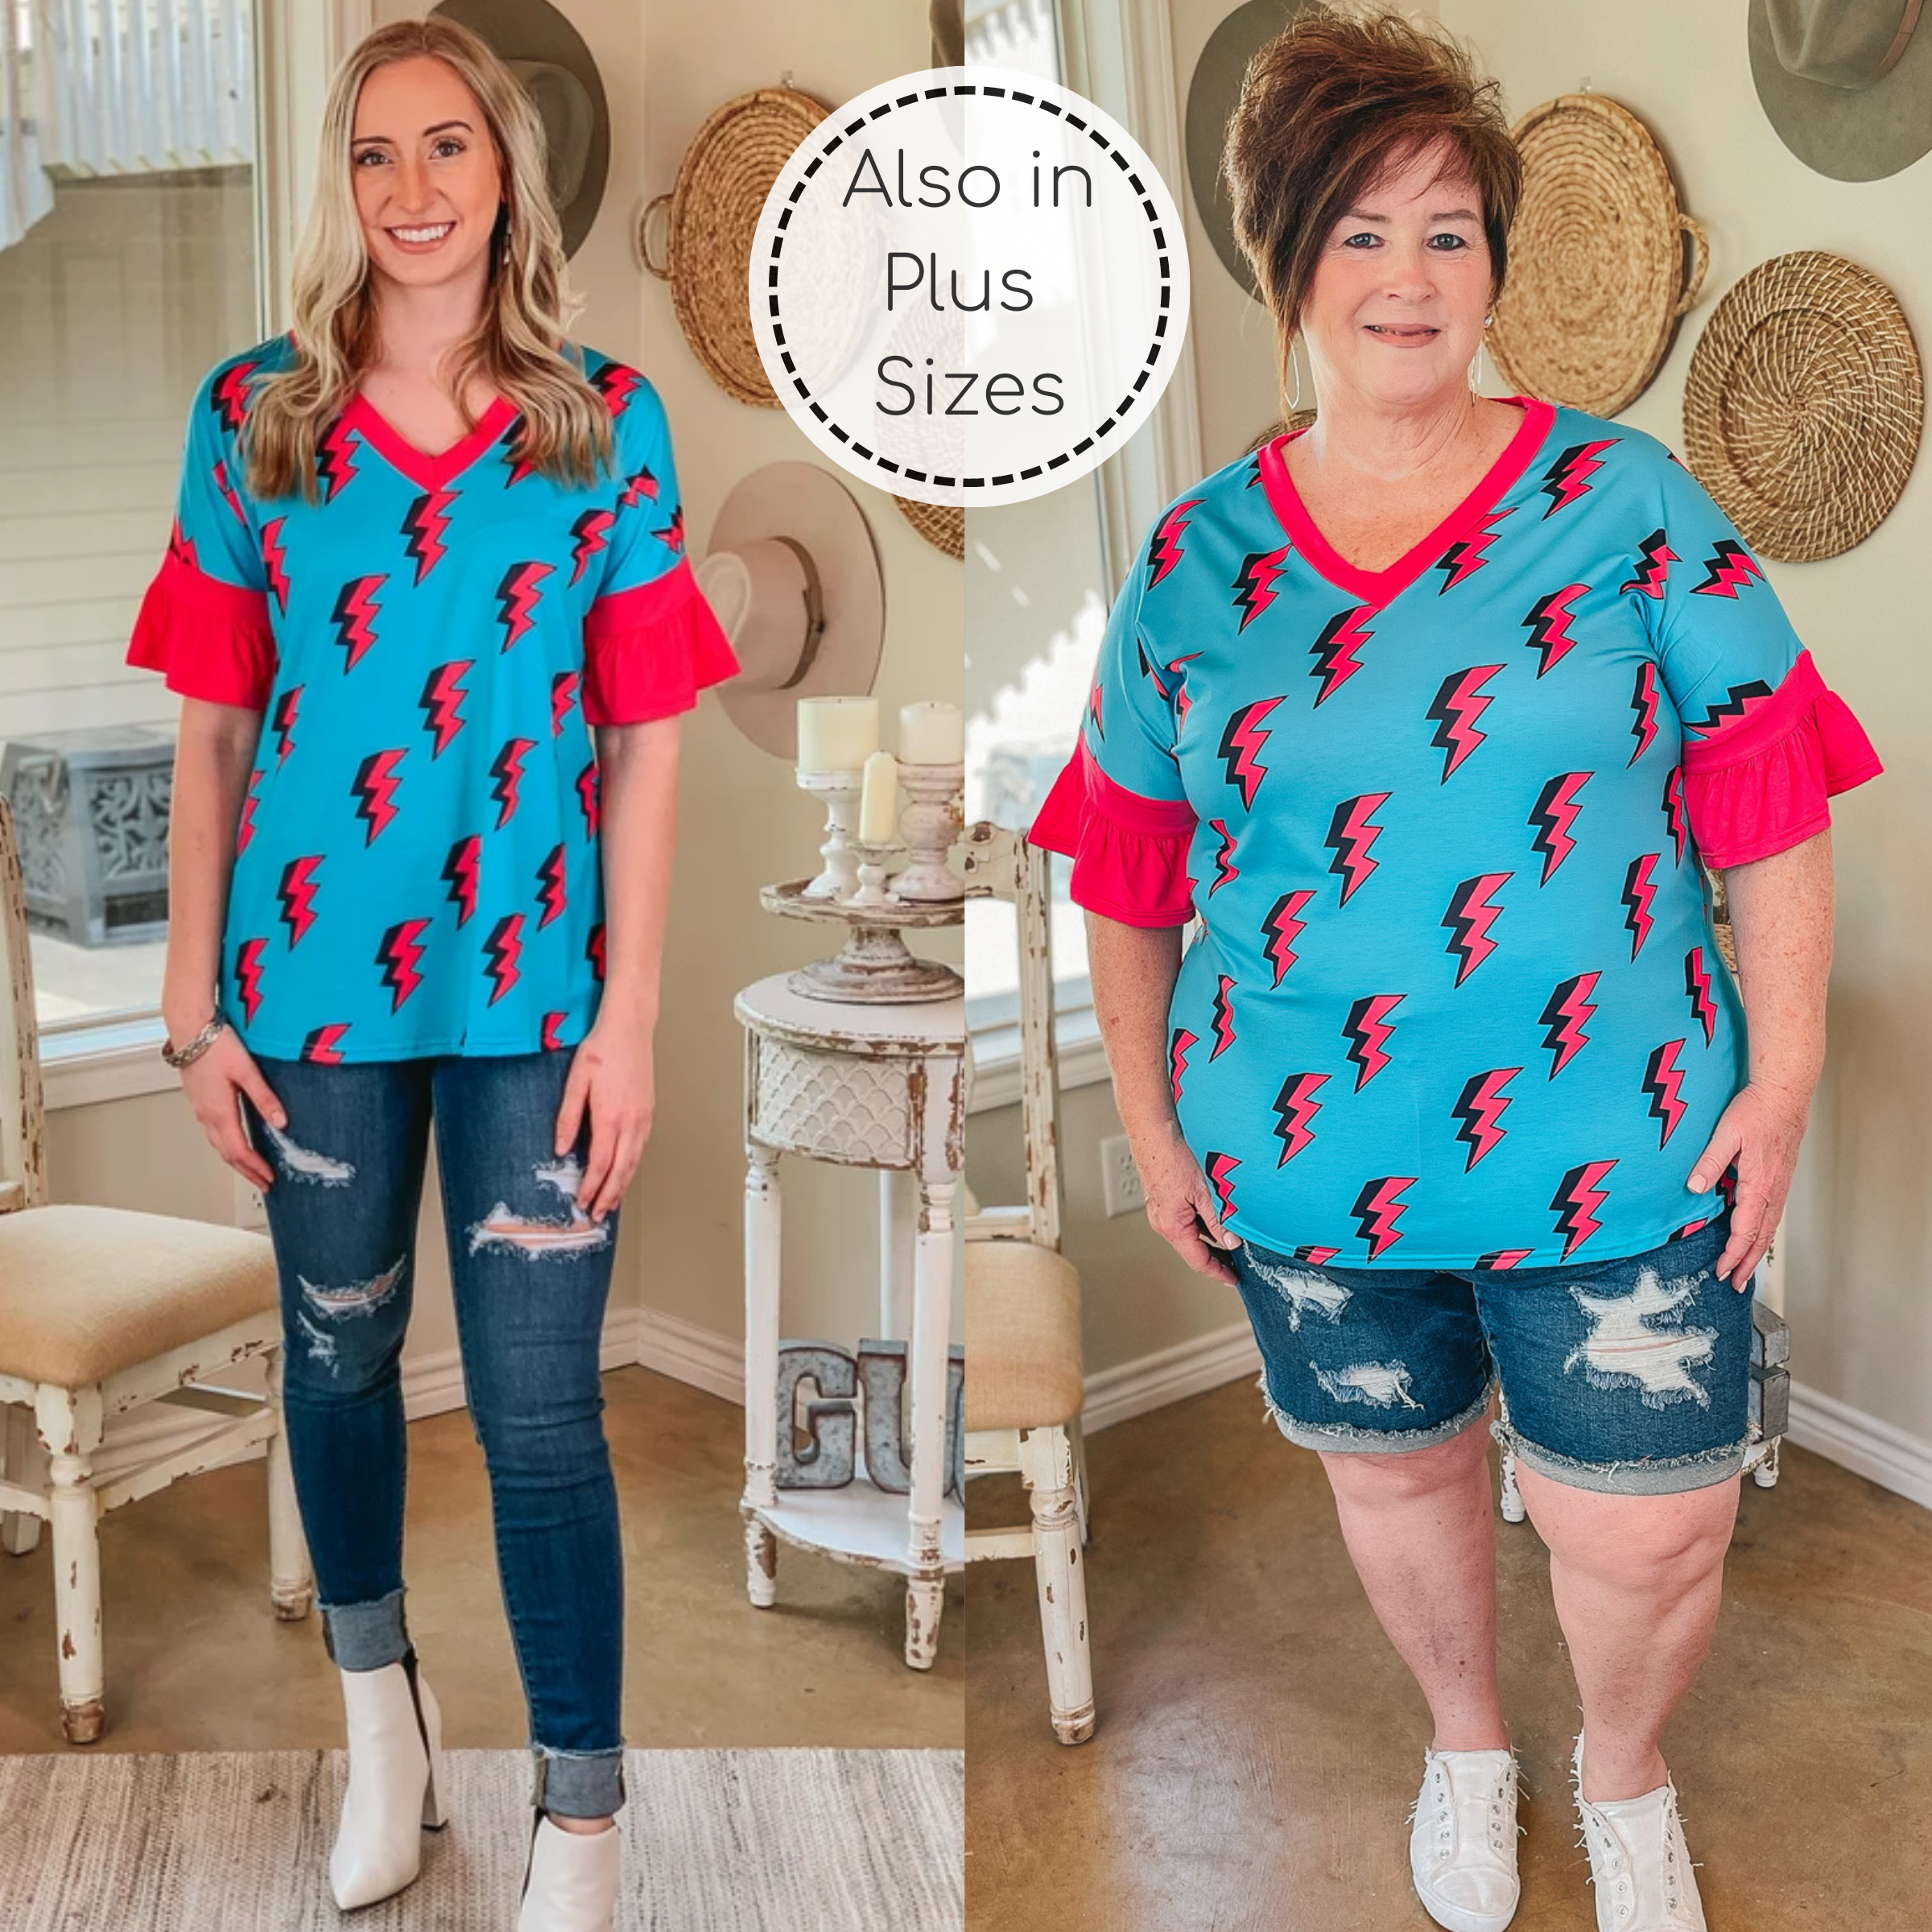 Last Chance Size S, M, & L | Saved By the Bell Fuchsia Lightning Bolt V Neck Top with Ruffle Sleeves in Turquoise - Giddy Up Glamour Boutique